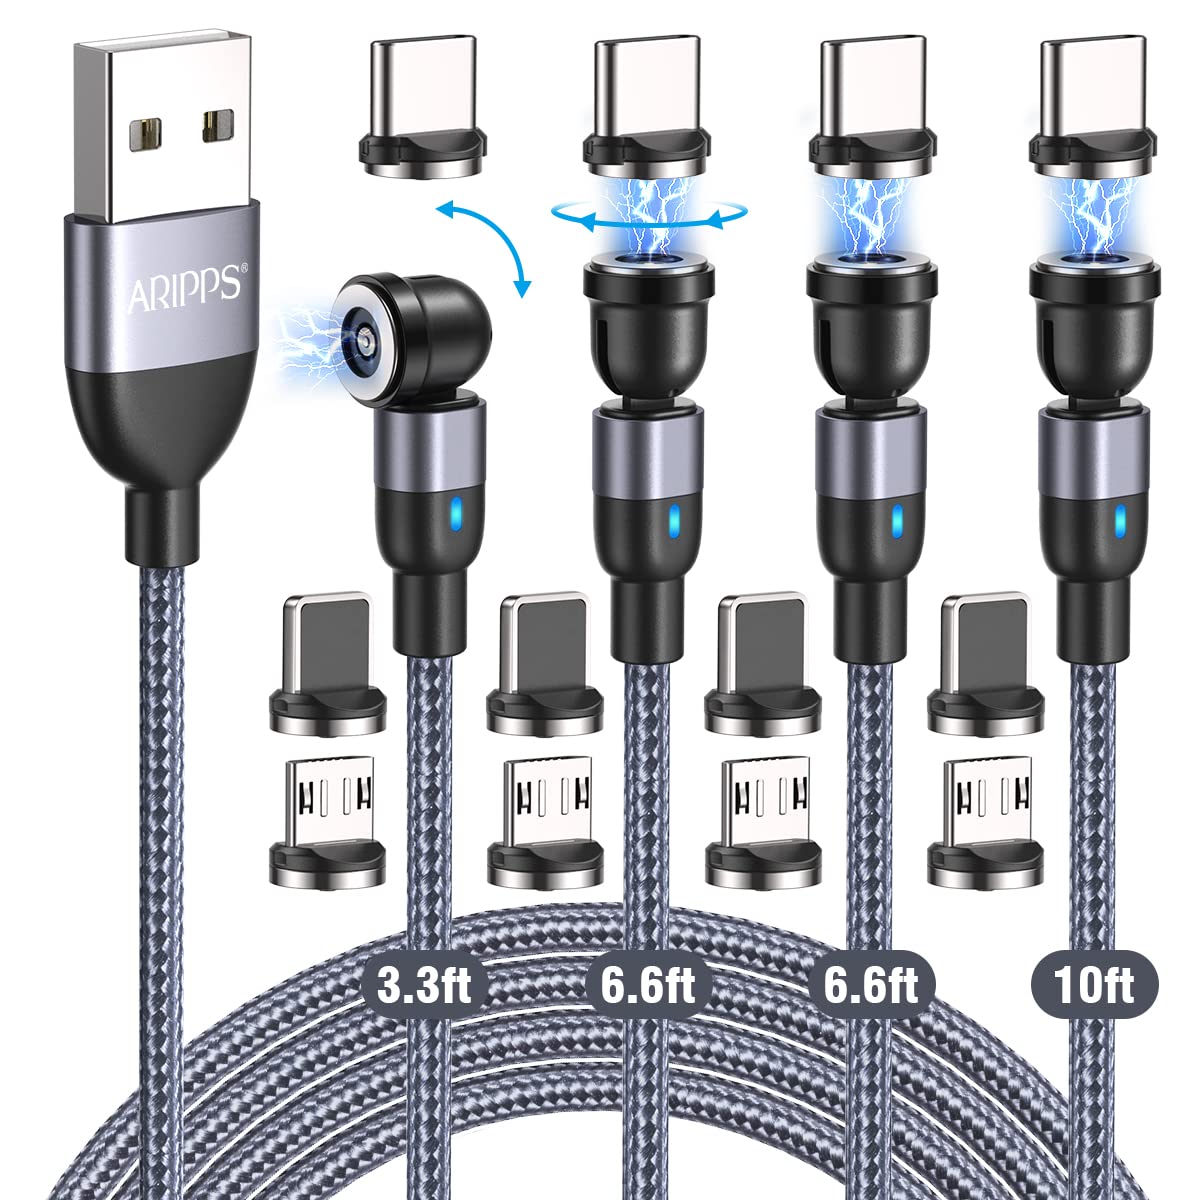 Aripps Magnetic Charging Cable 4 Pack [...]